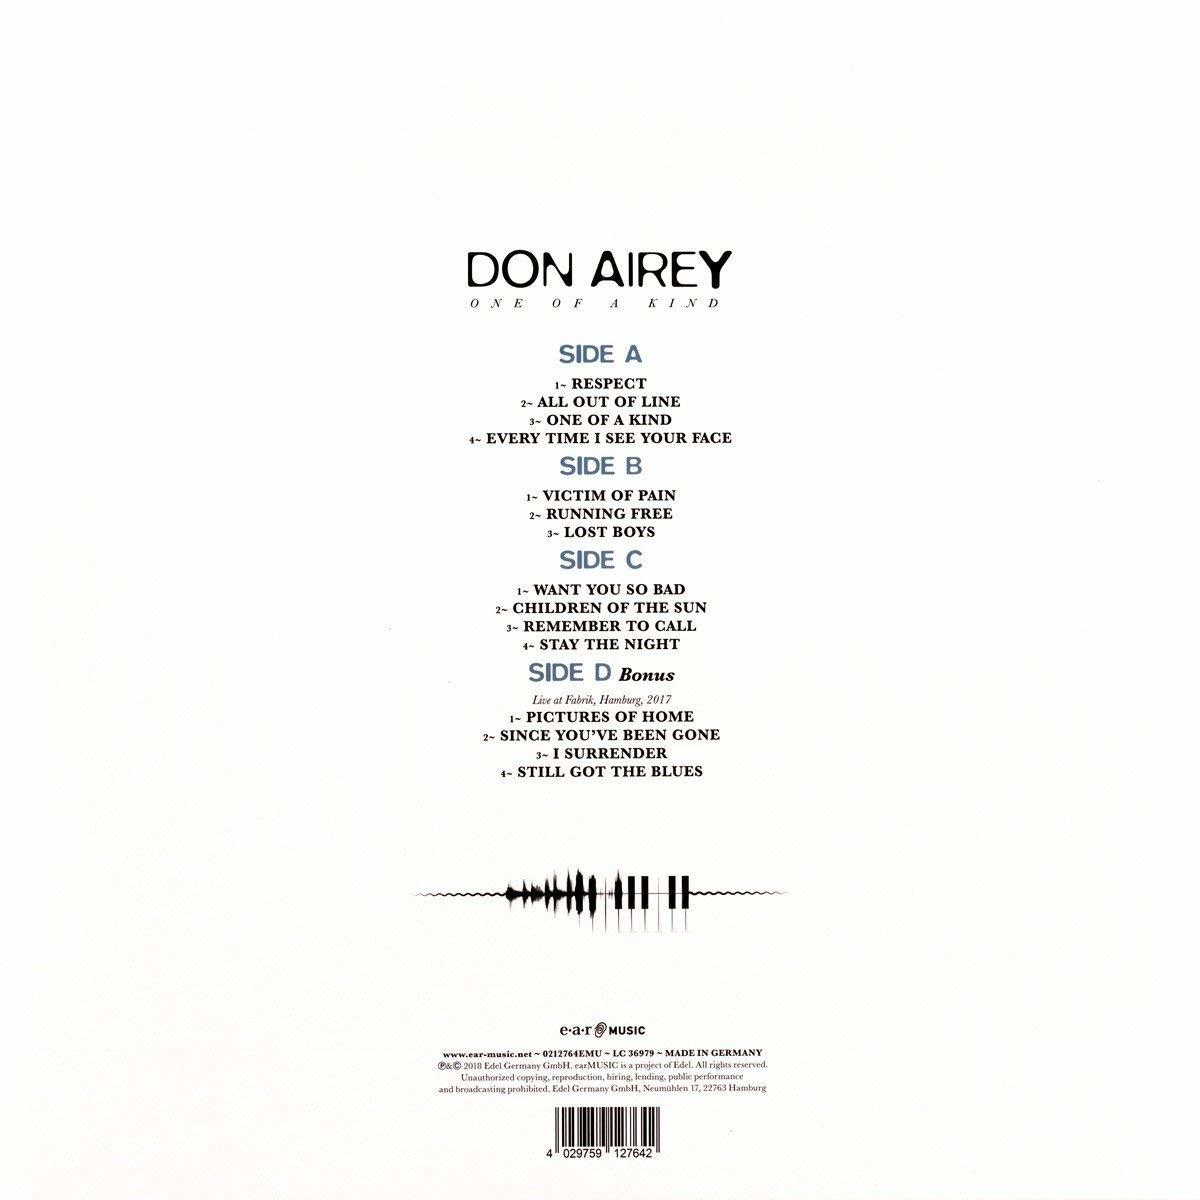 Don Airey - One - Of A (Vinyl) Kind